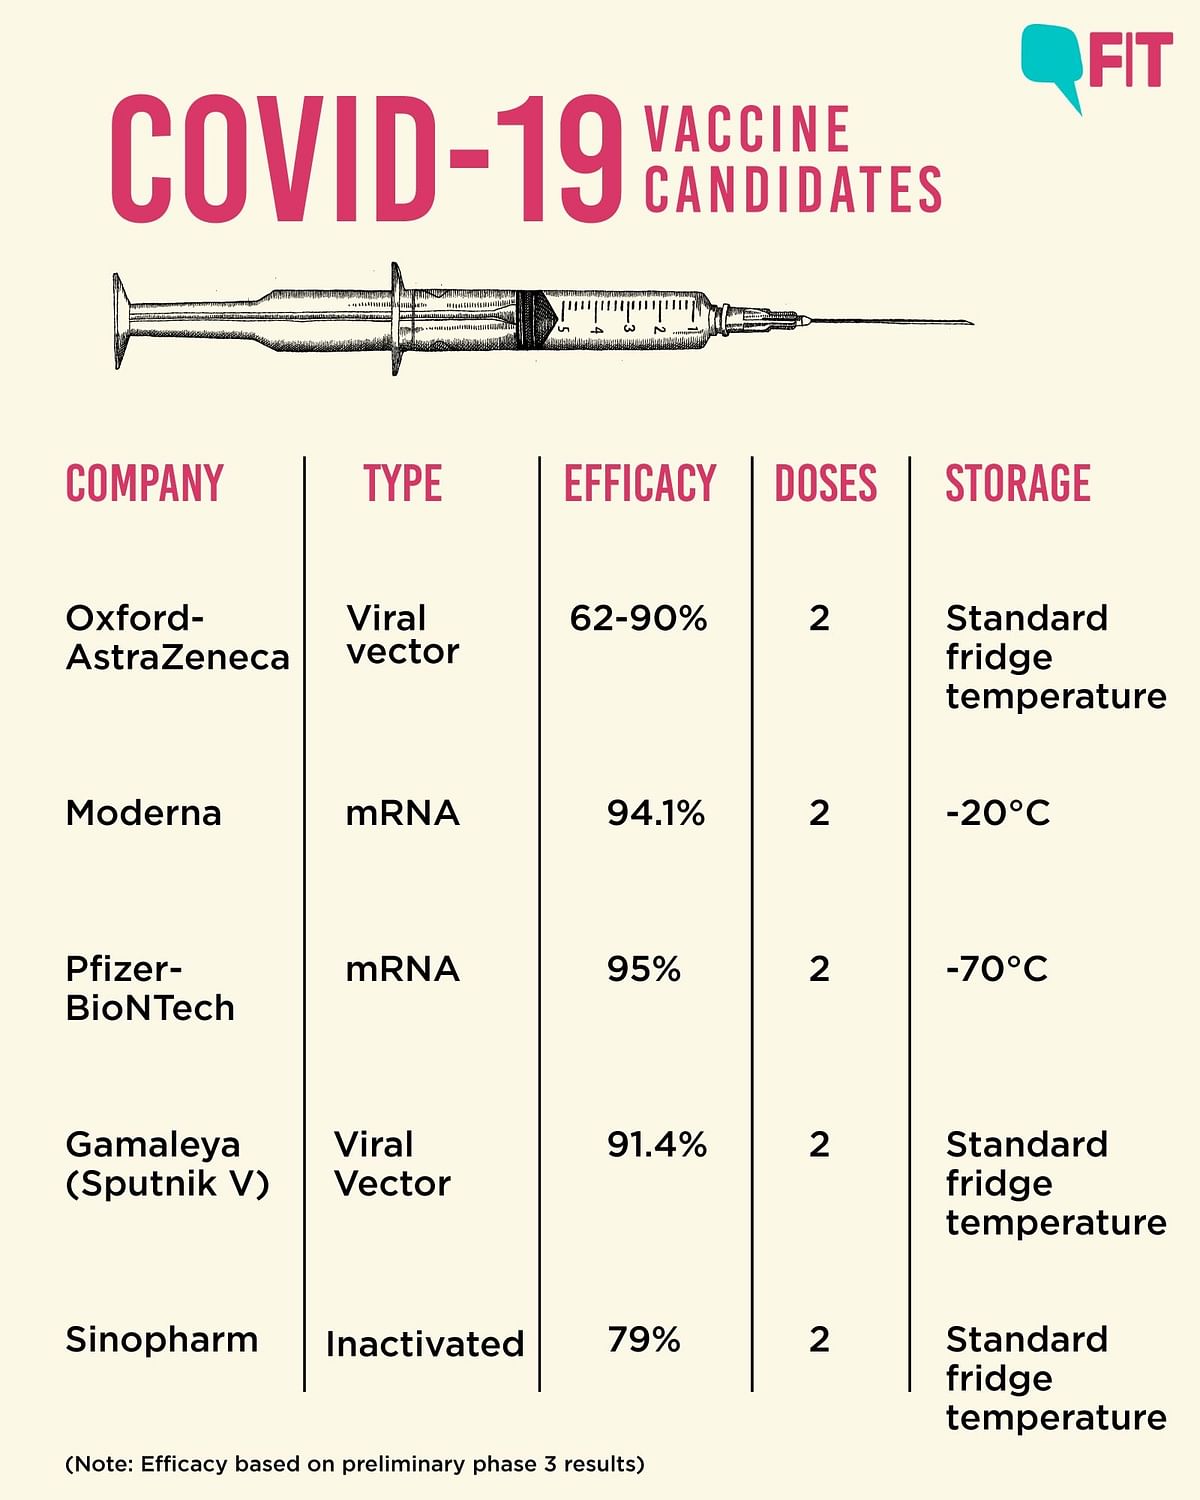 Here’s a look at the key vaccine candidates and how they differ from each other.